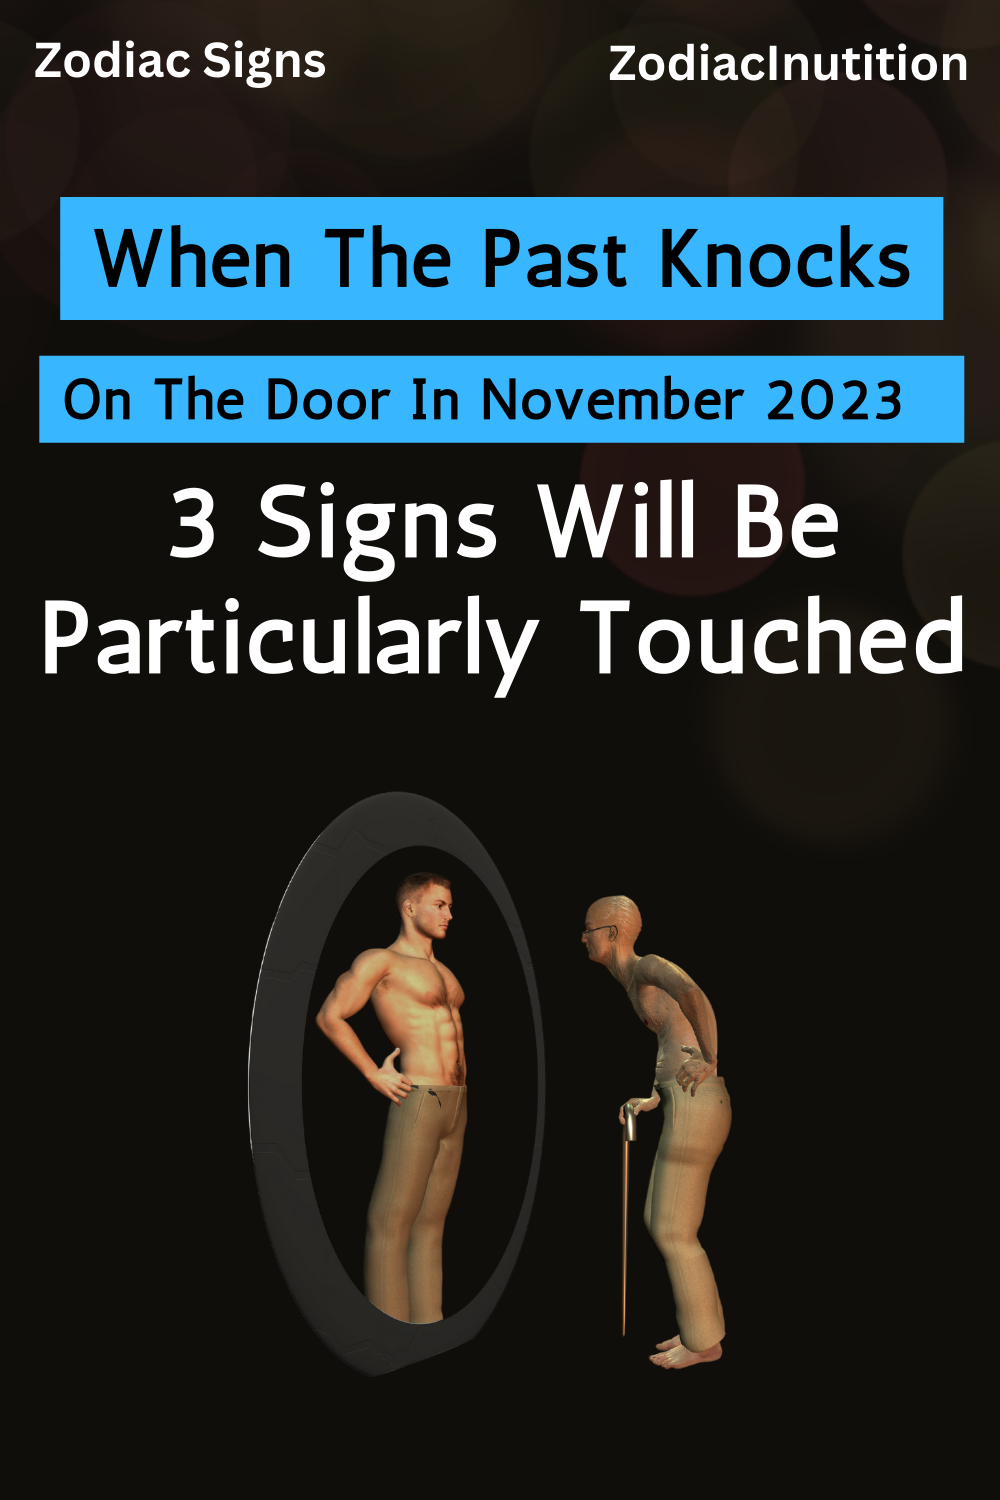 When The Past Knocks On The Door In November 2023: 3 Signs Will Be Particularly Touched